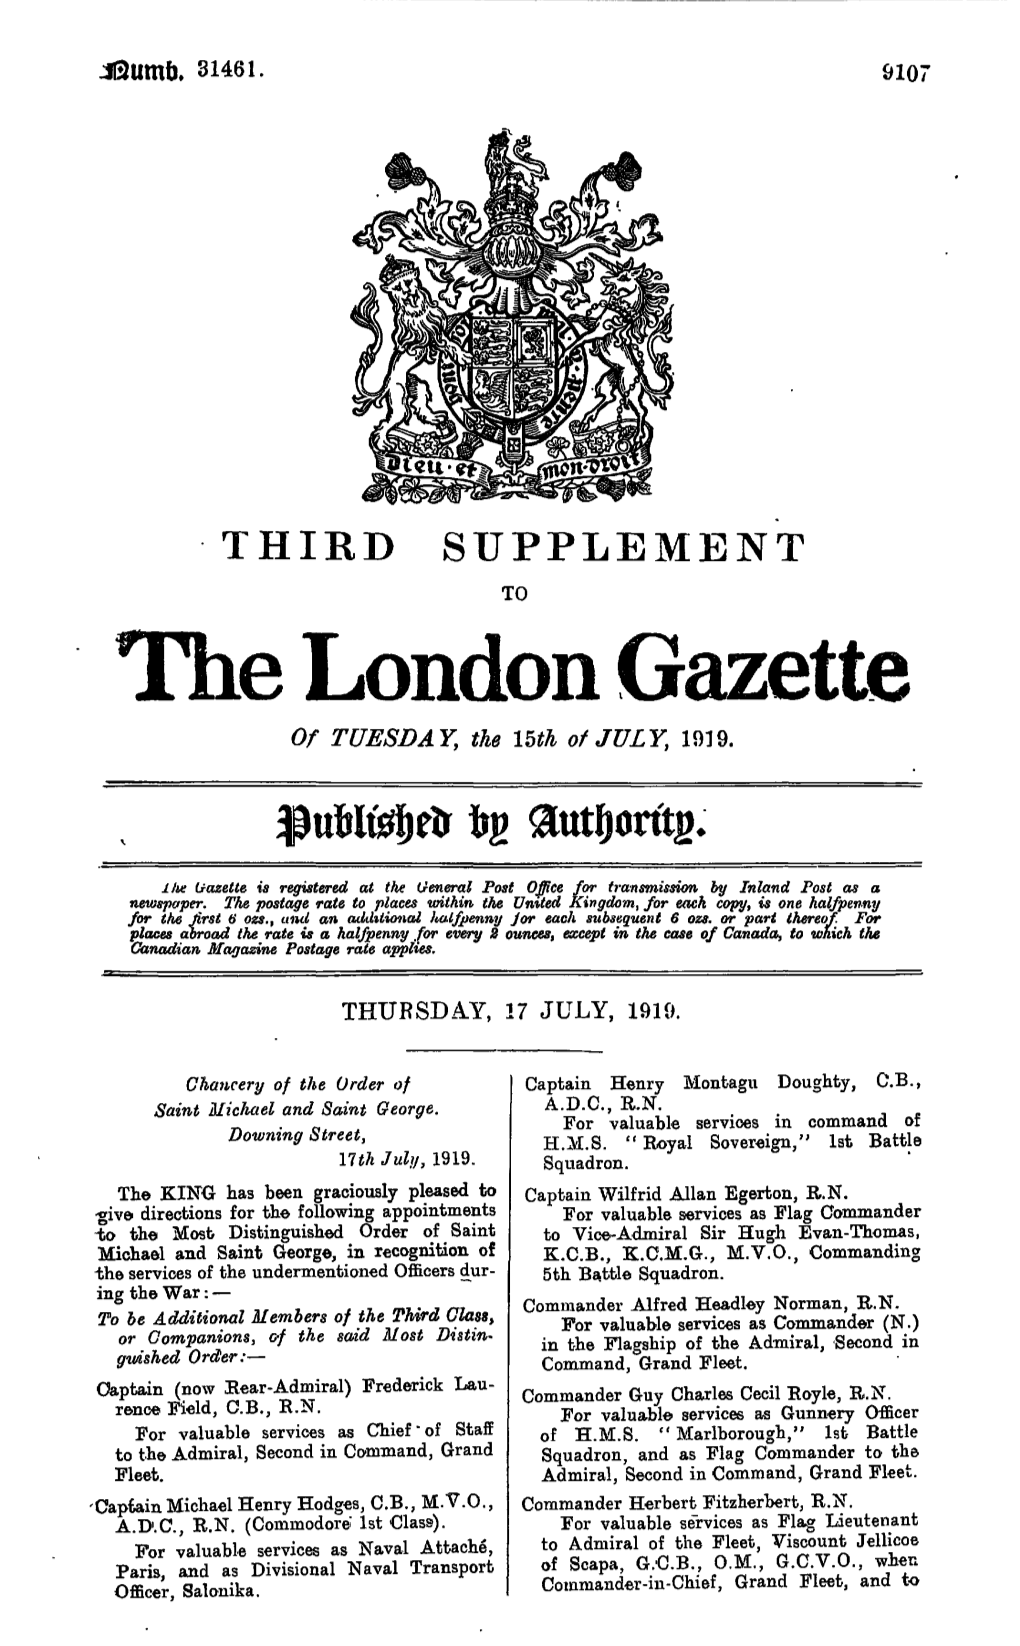 The London Gazette of TUESDAY, the 15Th of JULY, 1919